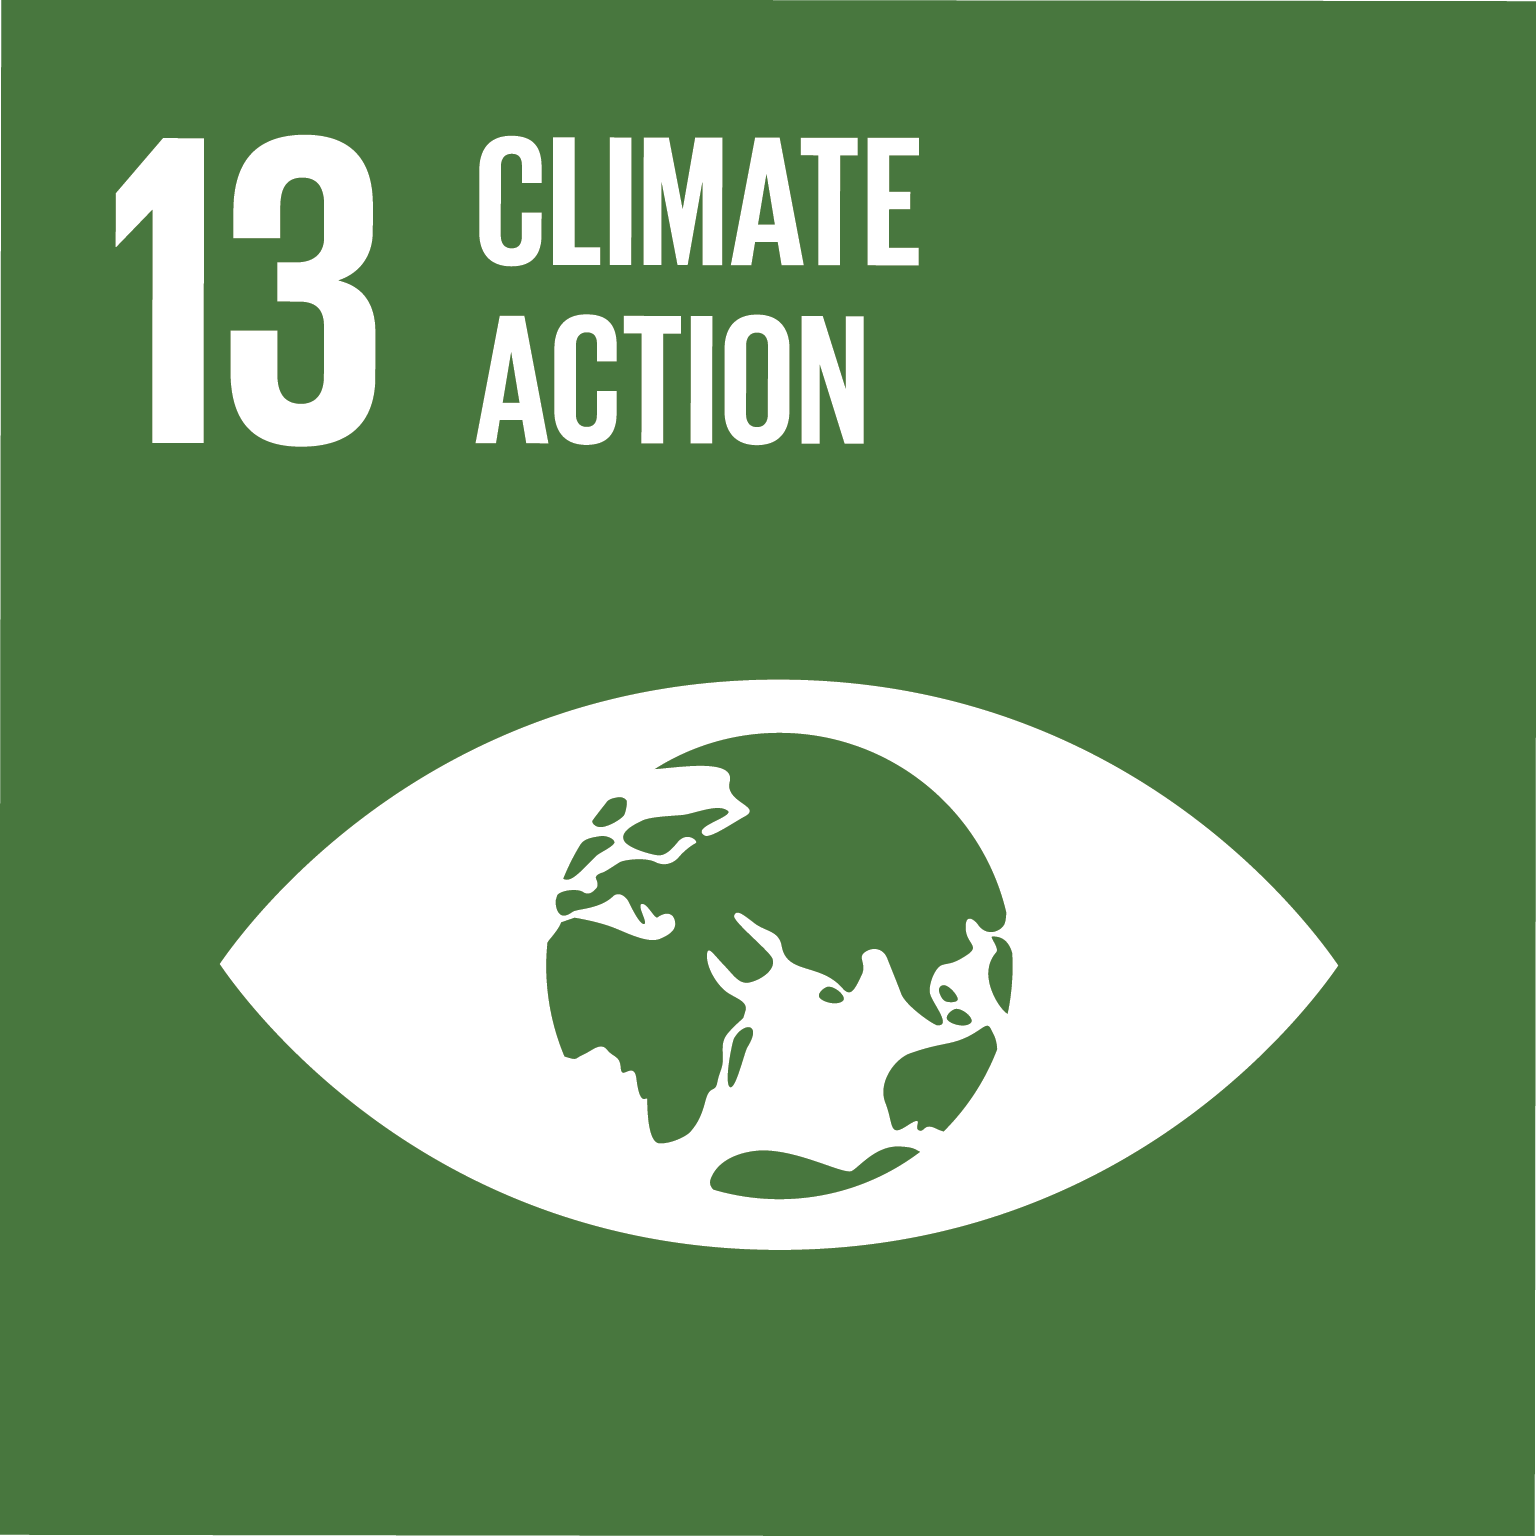 13 MEASURES FOR CLIMATE PROTECTION